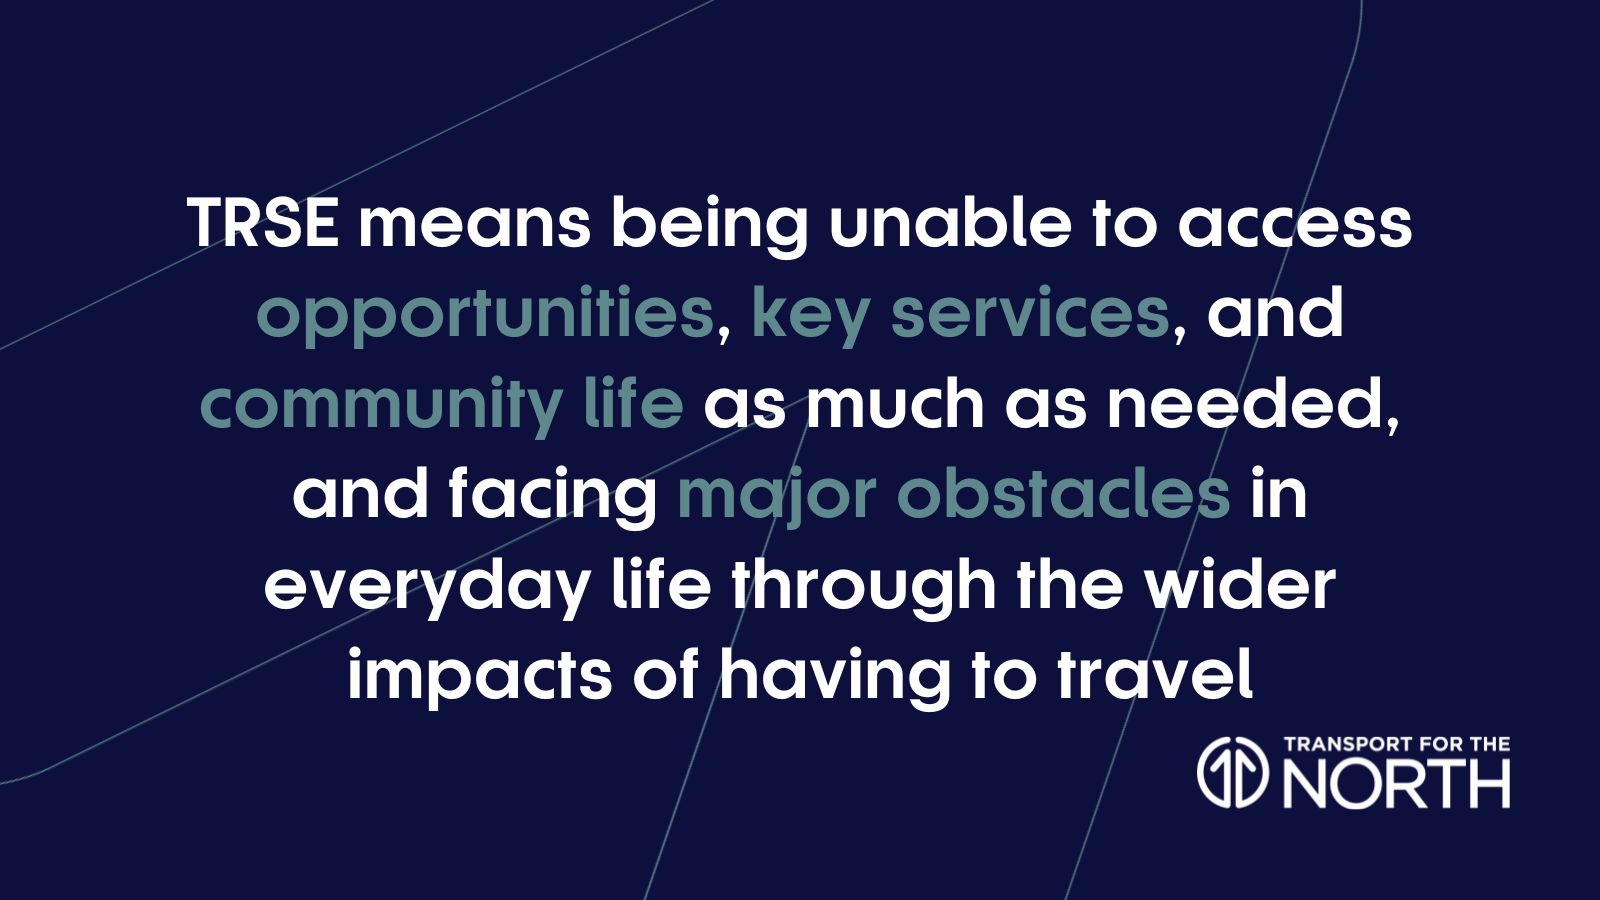 TRSE means being unable to access opportunities, key services, and community life as much as needed, and facing major obstacles in everyday life through the wider impacts of having to travel